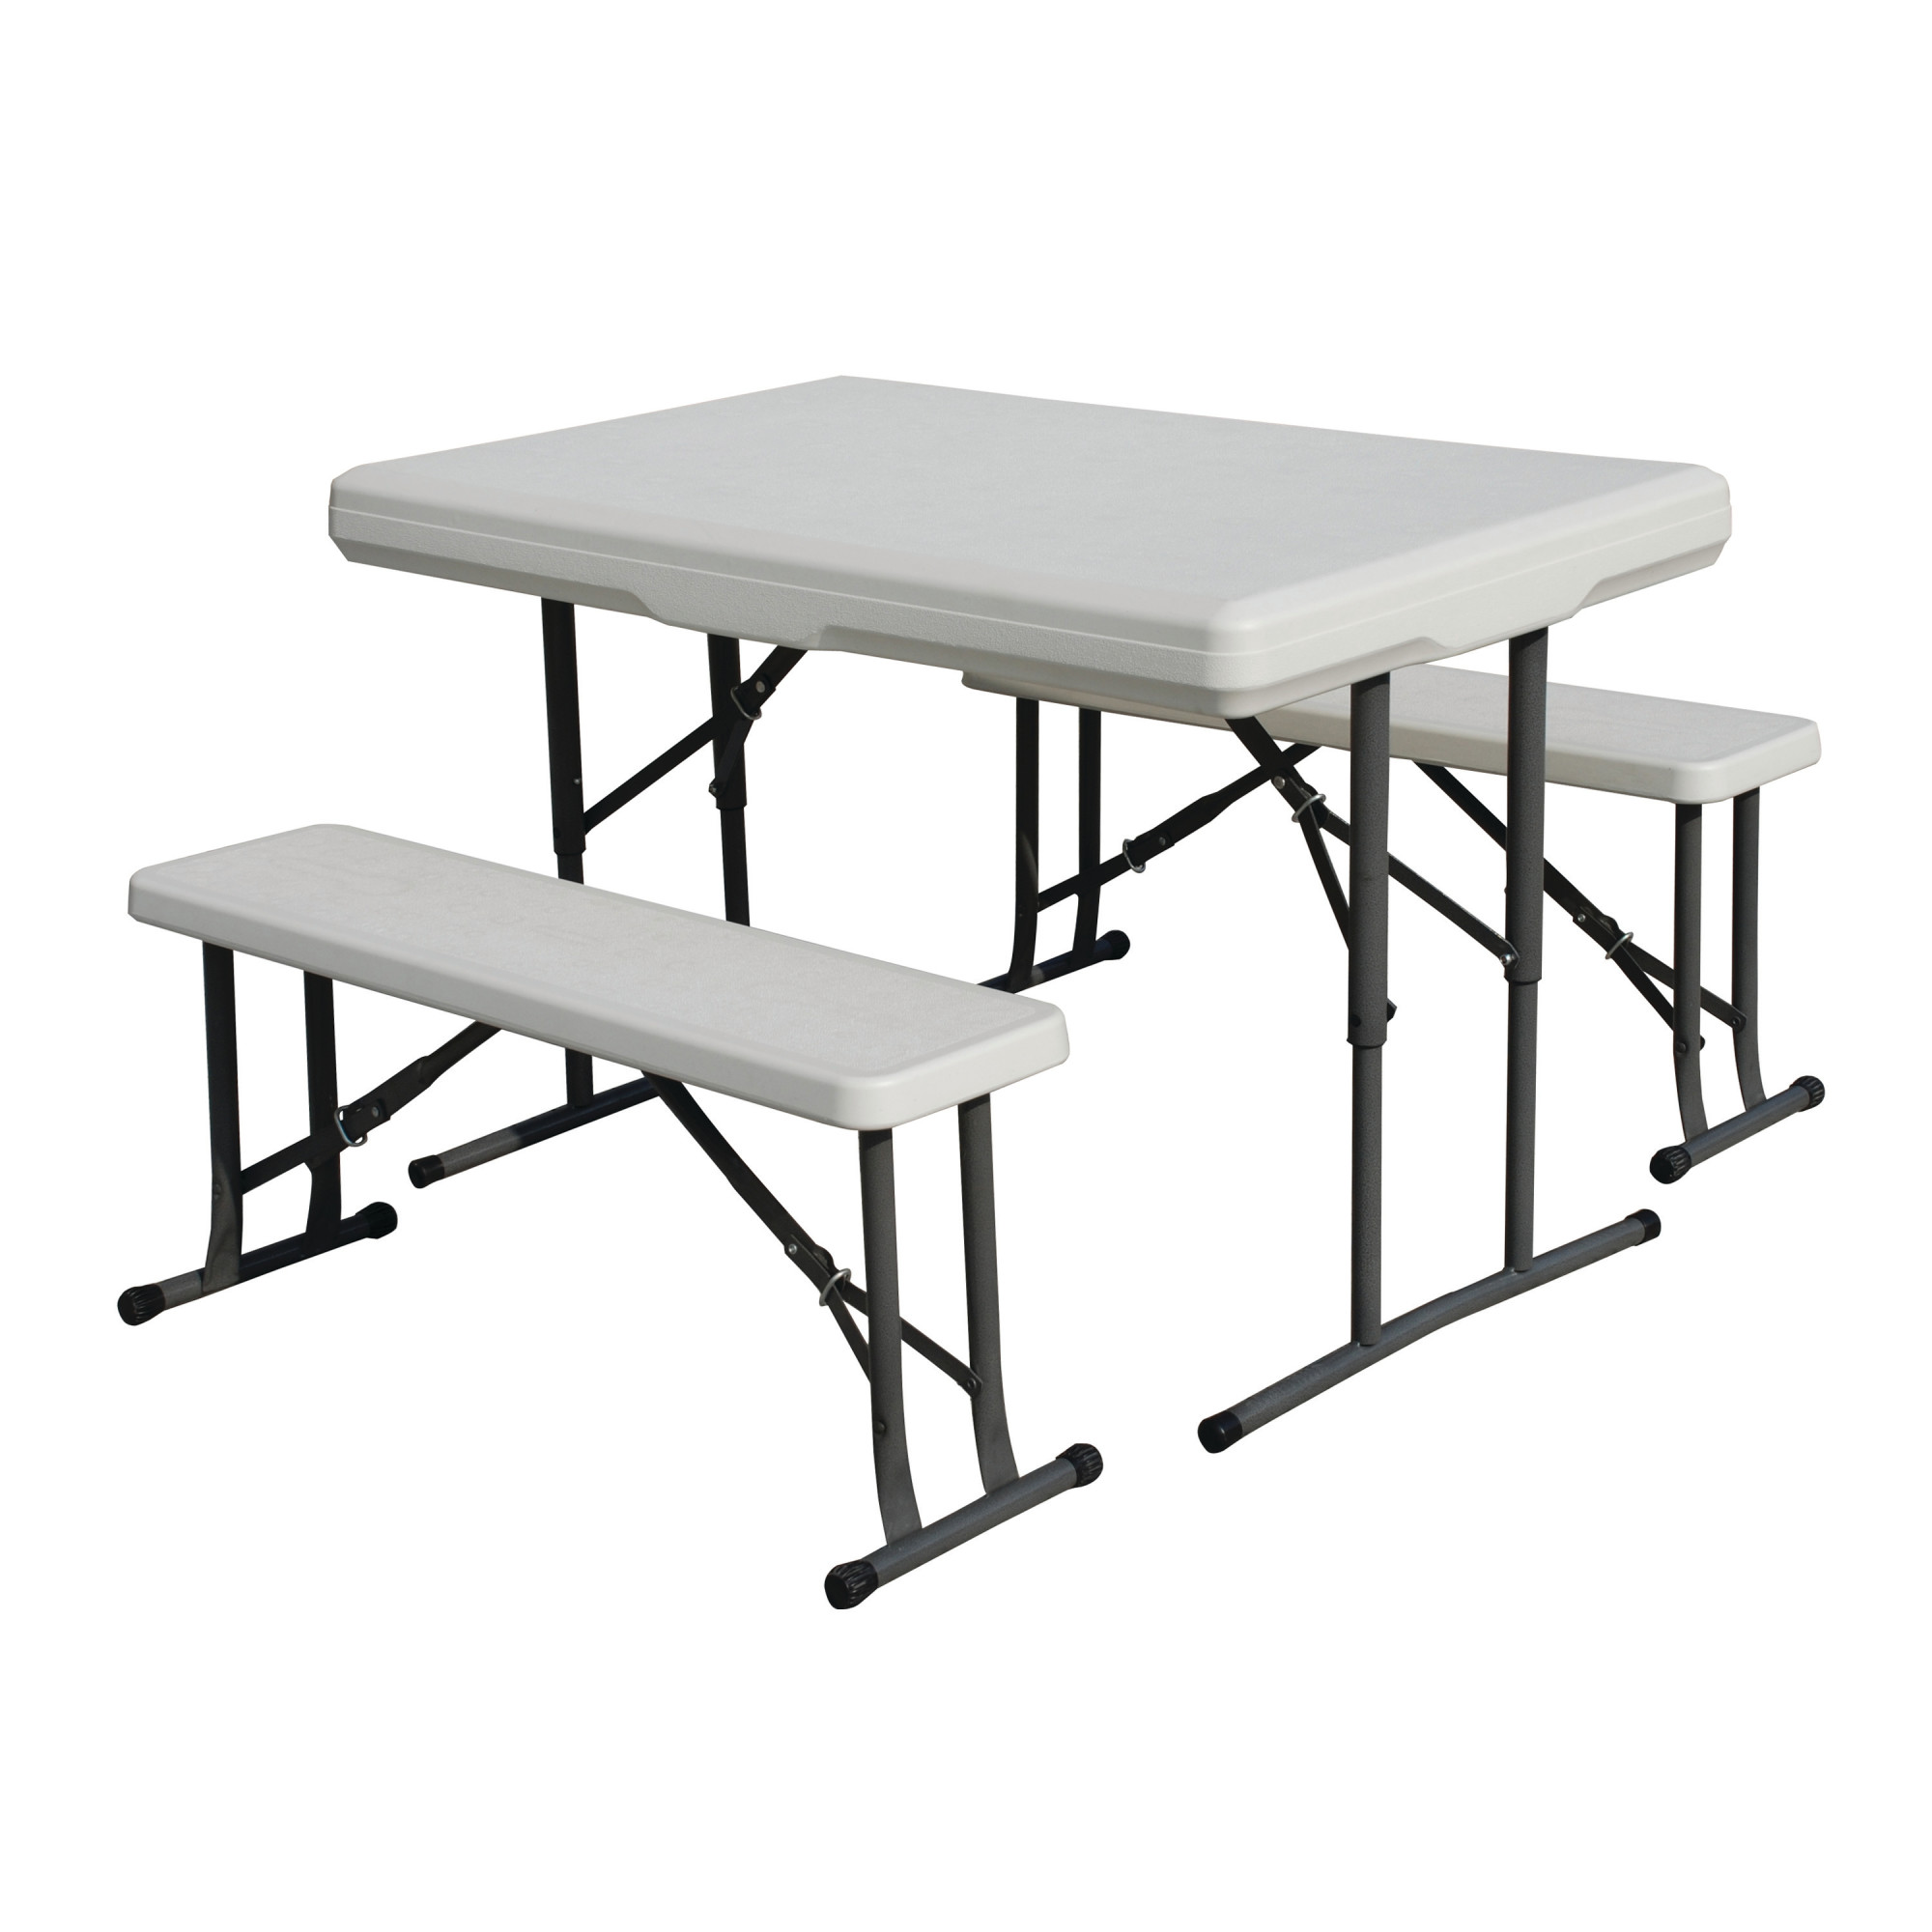 Stansport Heavy-Duty Picnic Table and Bench Set - image 1 of 12